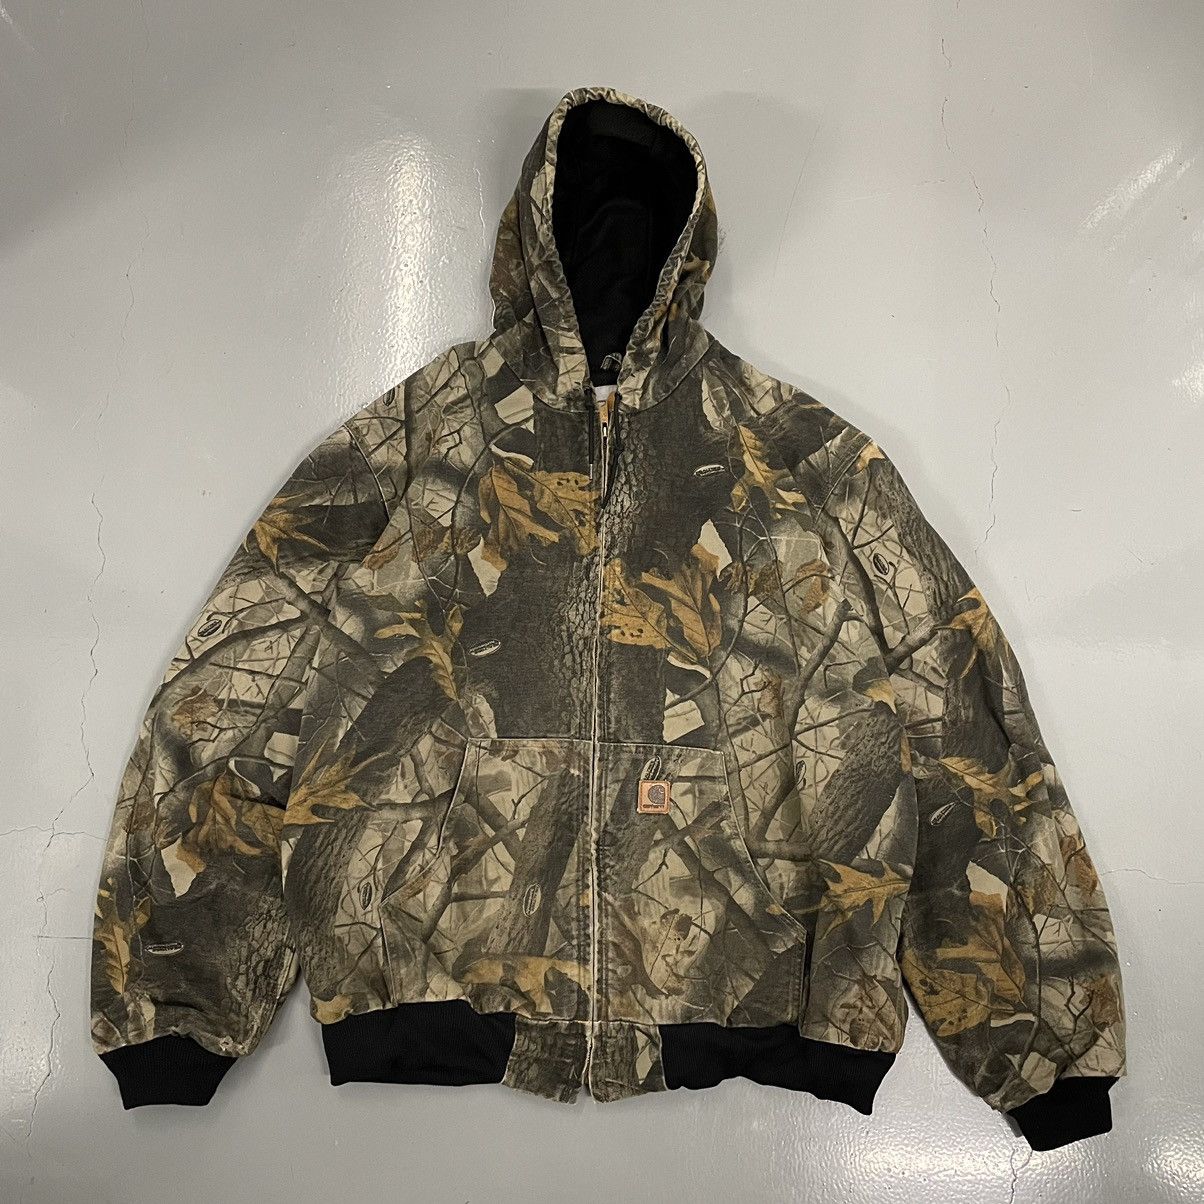 Pre-owned Carhartt X Vintage Crazy Vintage Carhartt Camo Realtree Hooded Jacket Faded